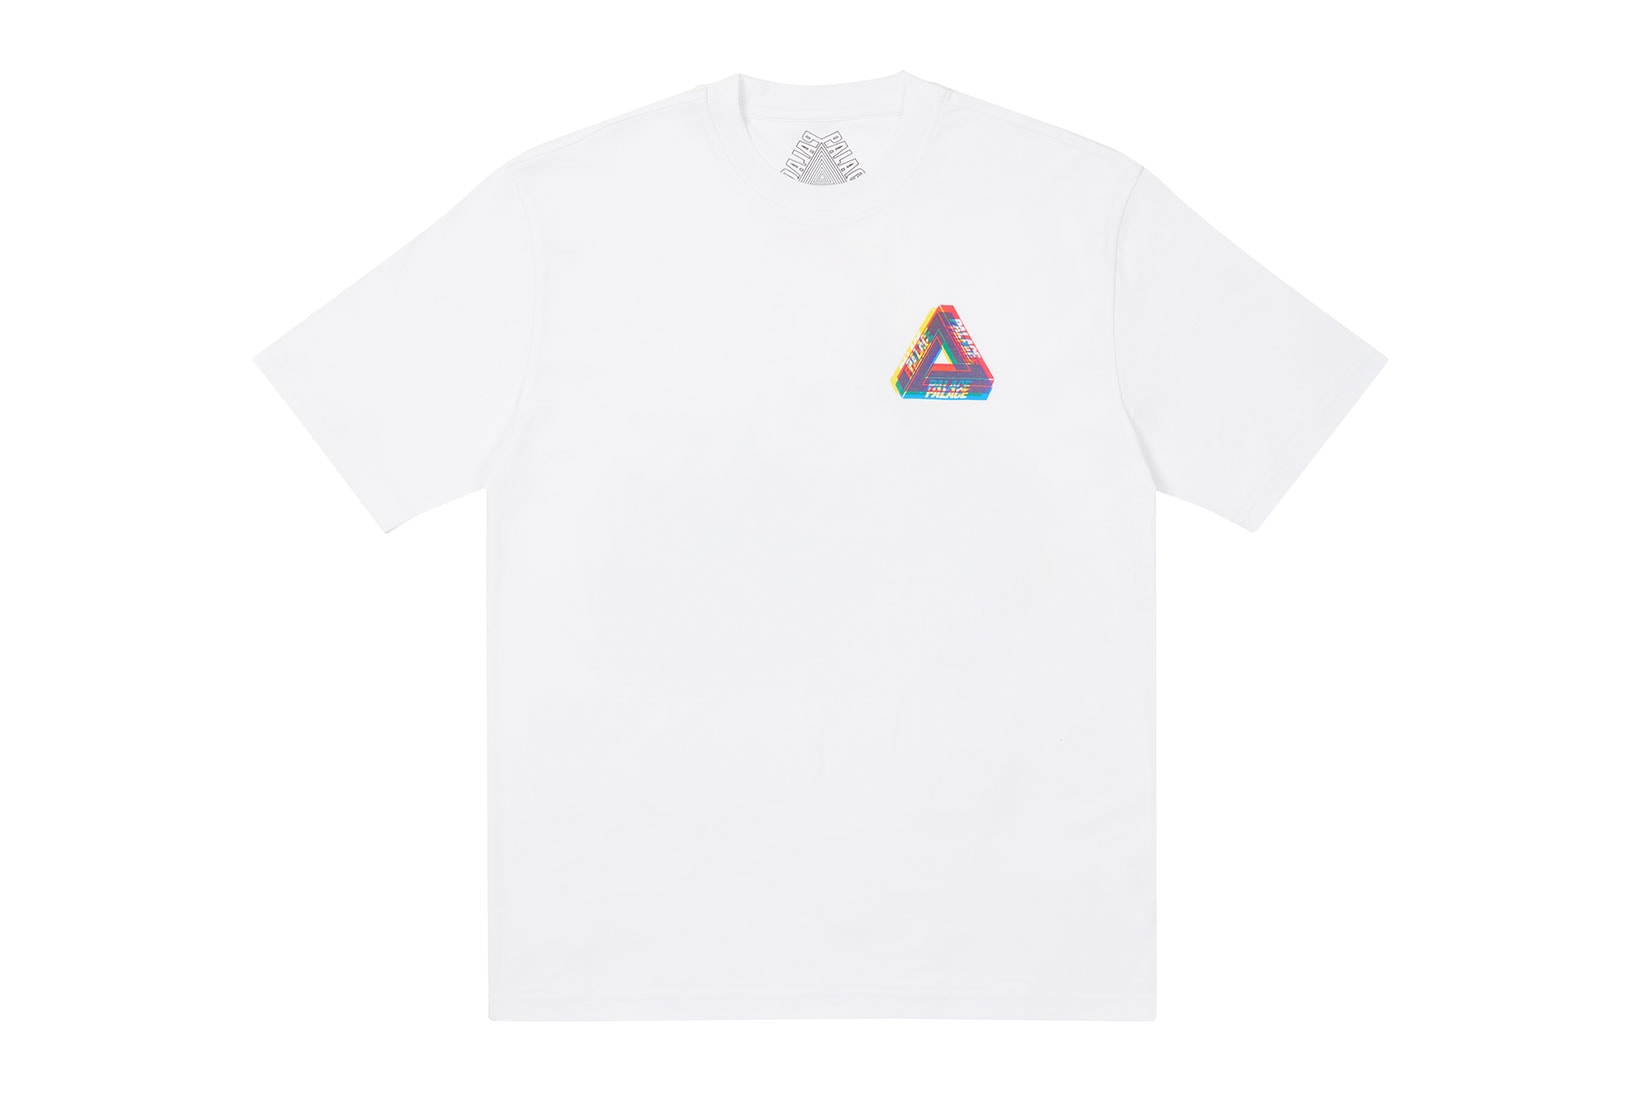 palace skateboards holiday drop 5 white t-shirts tees release when to buy